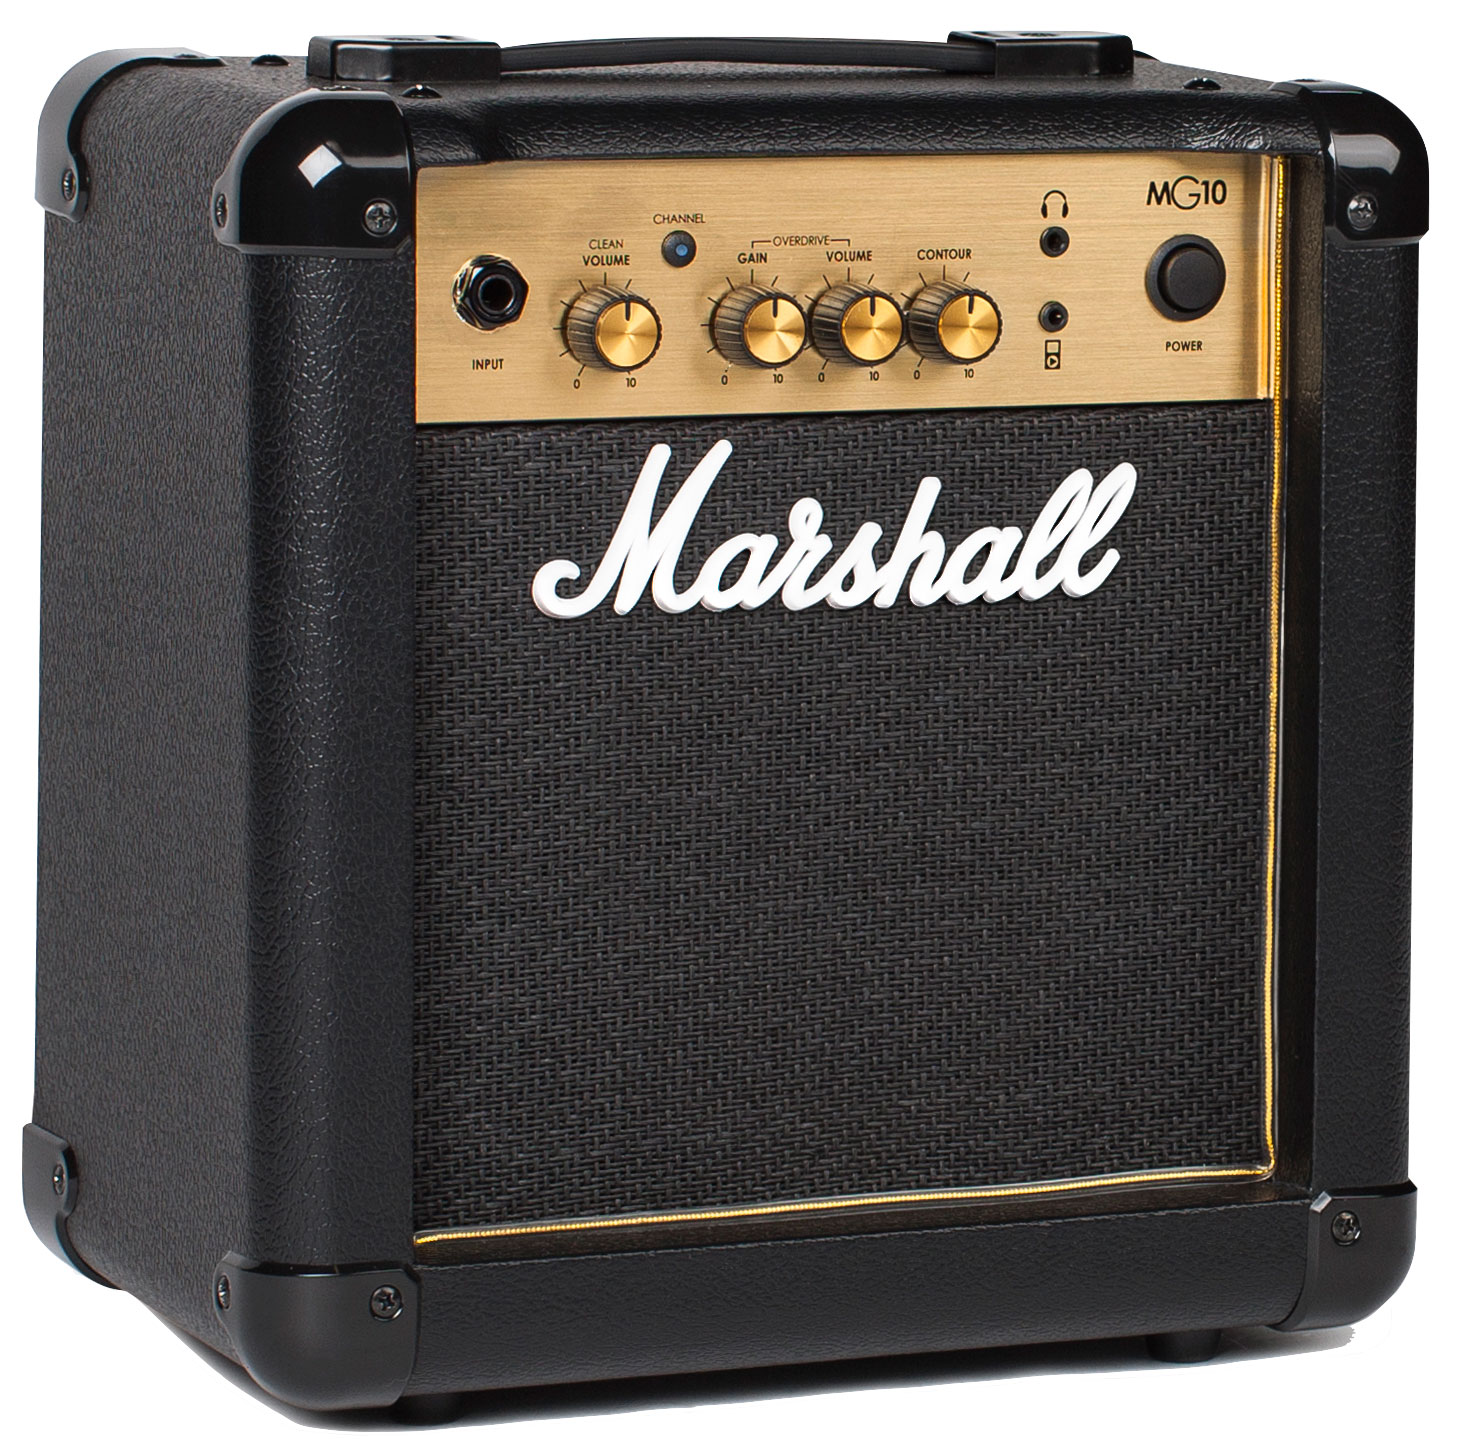 Eastone Sdc70 +marshall Mg10g Gold +cable +housse +courroie +mediators - Black - Electric guitar set - Variation 6